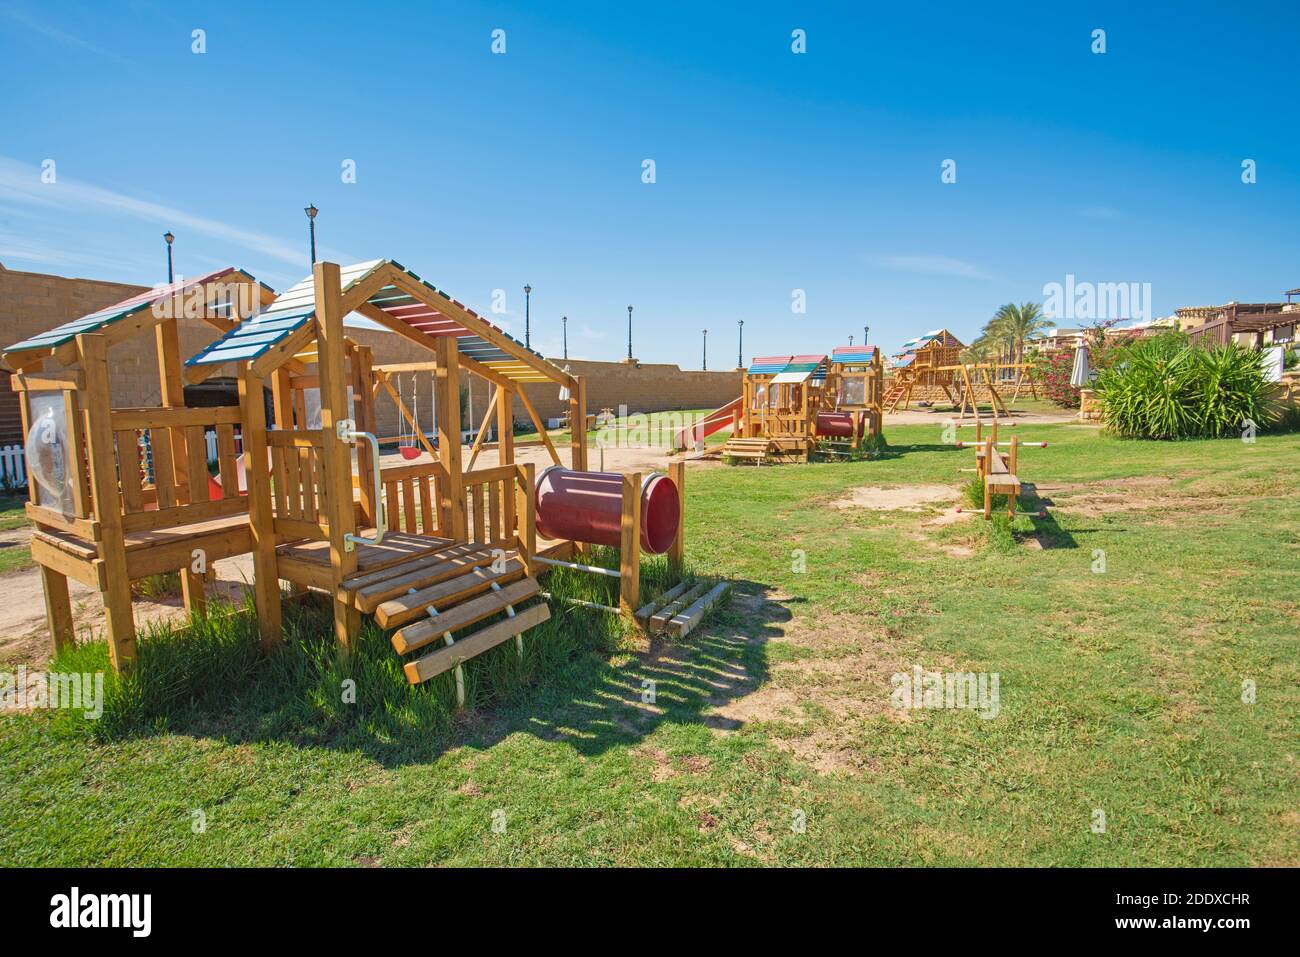 Large wooden climbing frame structure in children's playground area of luxury hotel resort Stock Photo